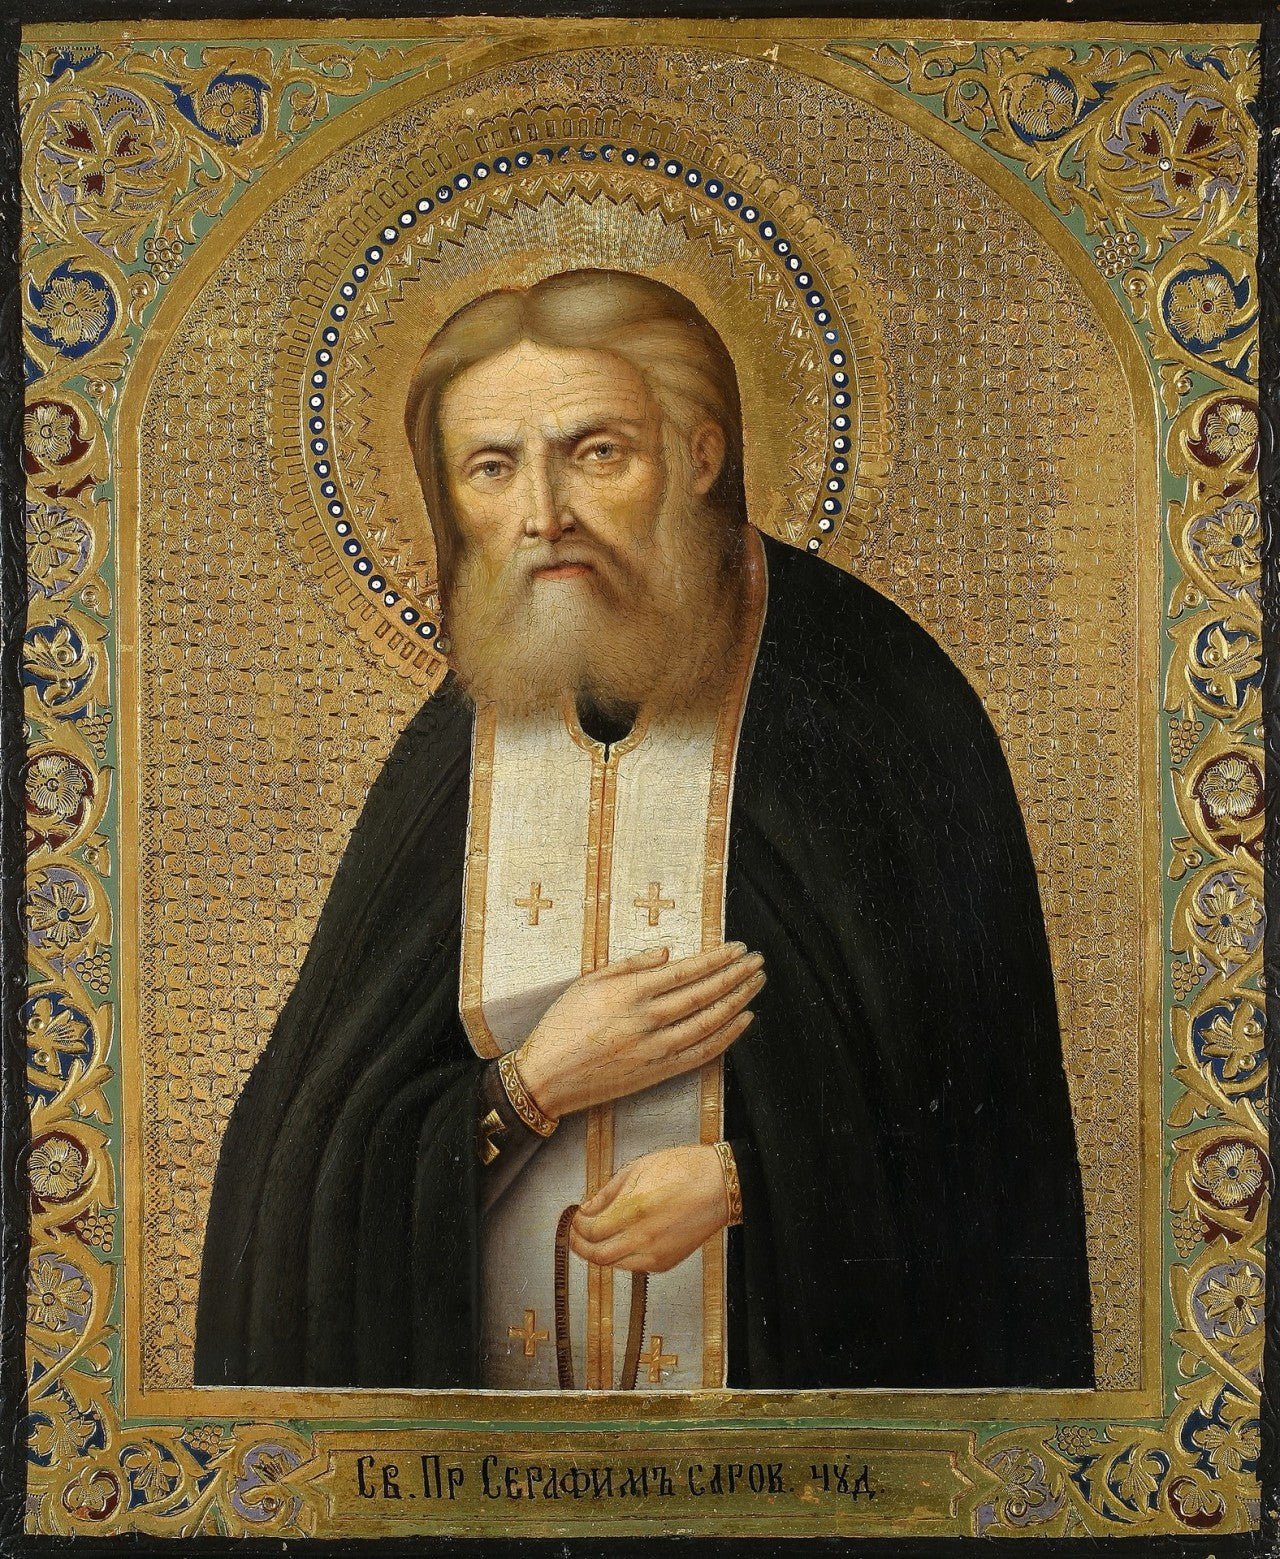 America Under Siege - A Sermon for the Feast of St. Seraphim of Sarov